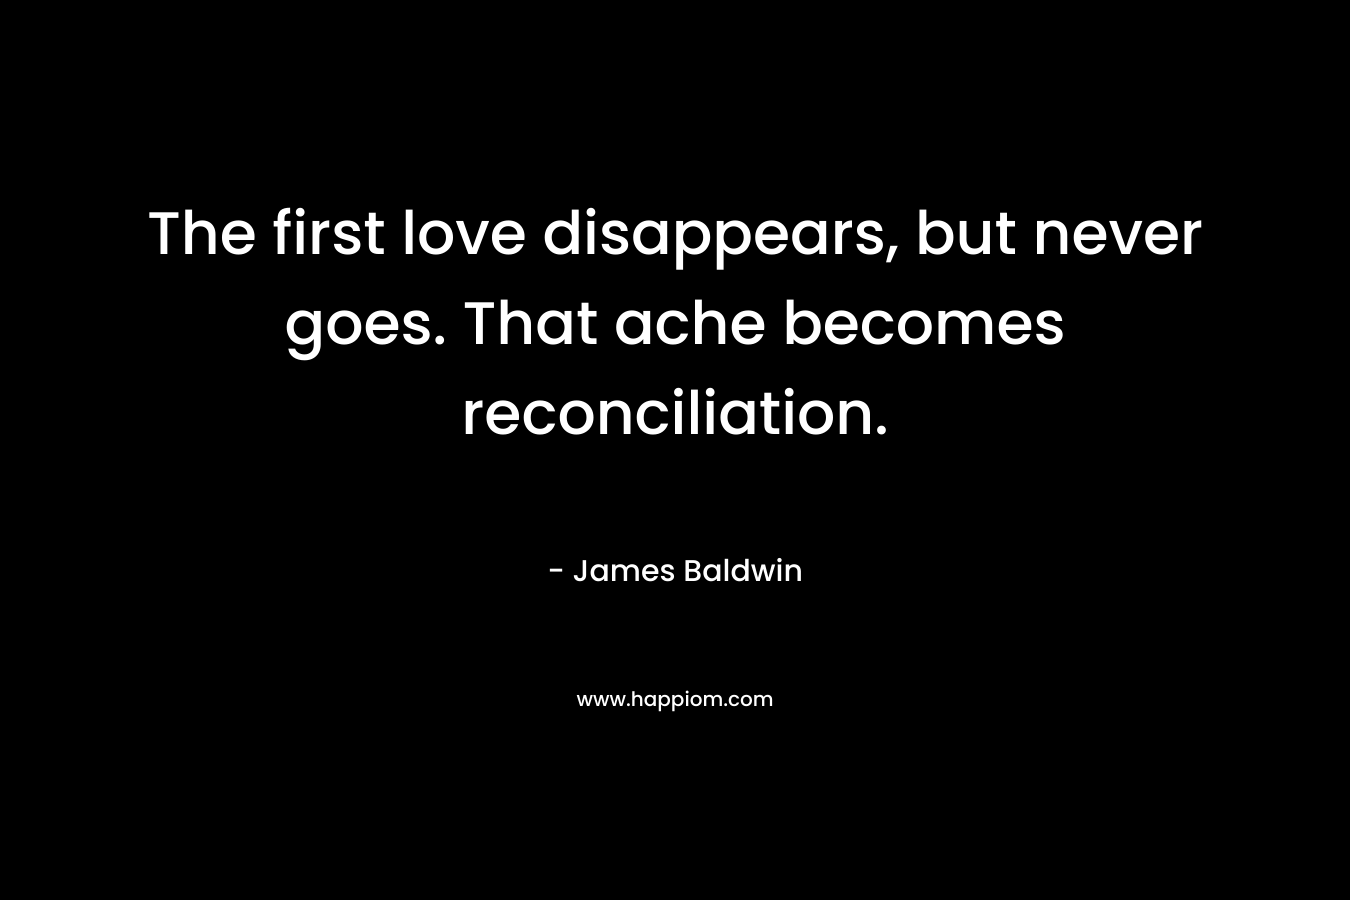 The first love disappears, but never goes. That ache becomes reconciliation.